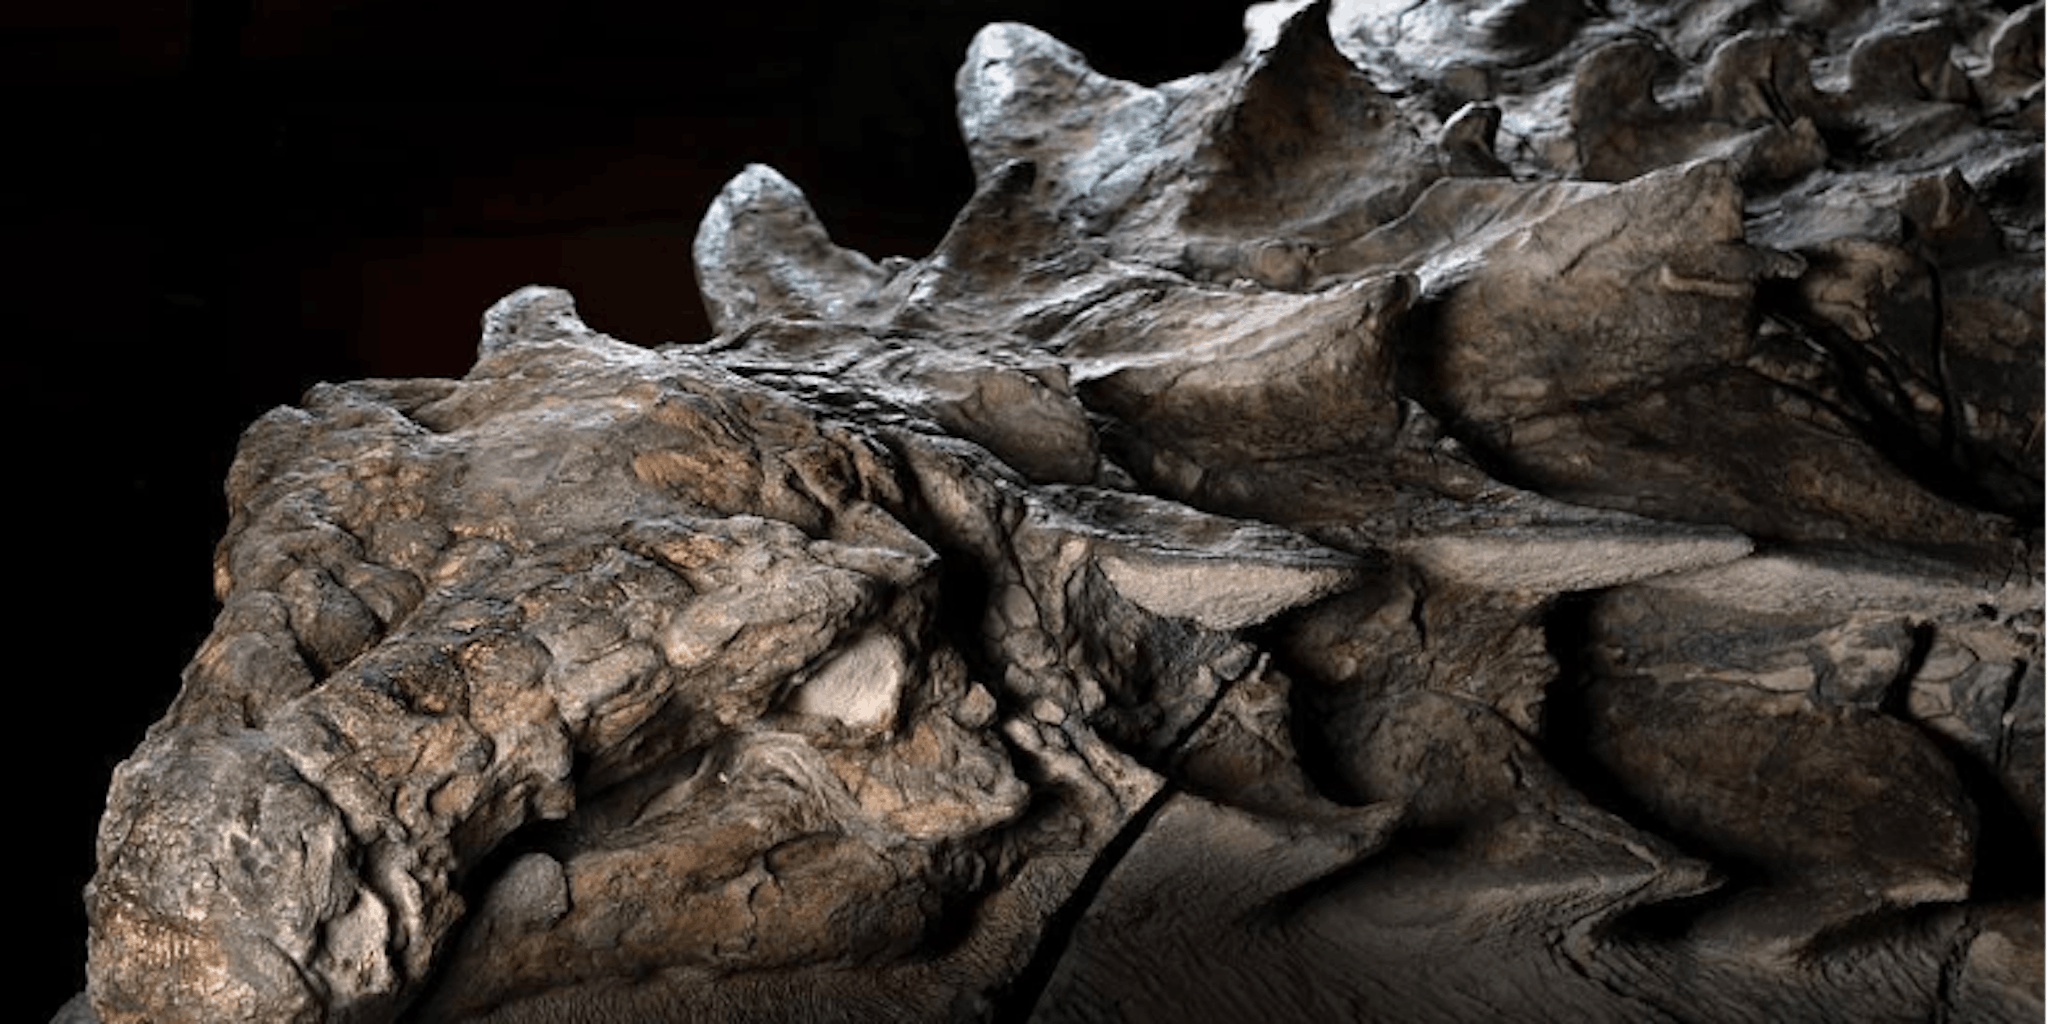 This Fossilized Dinosaur Is So Well Preserved you Can See Its Skin Texture